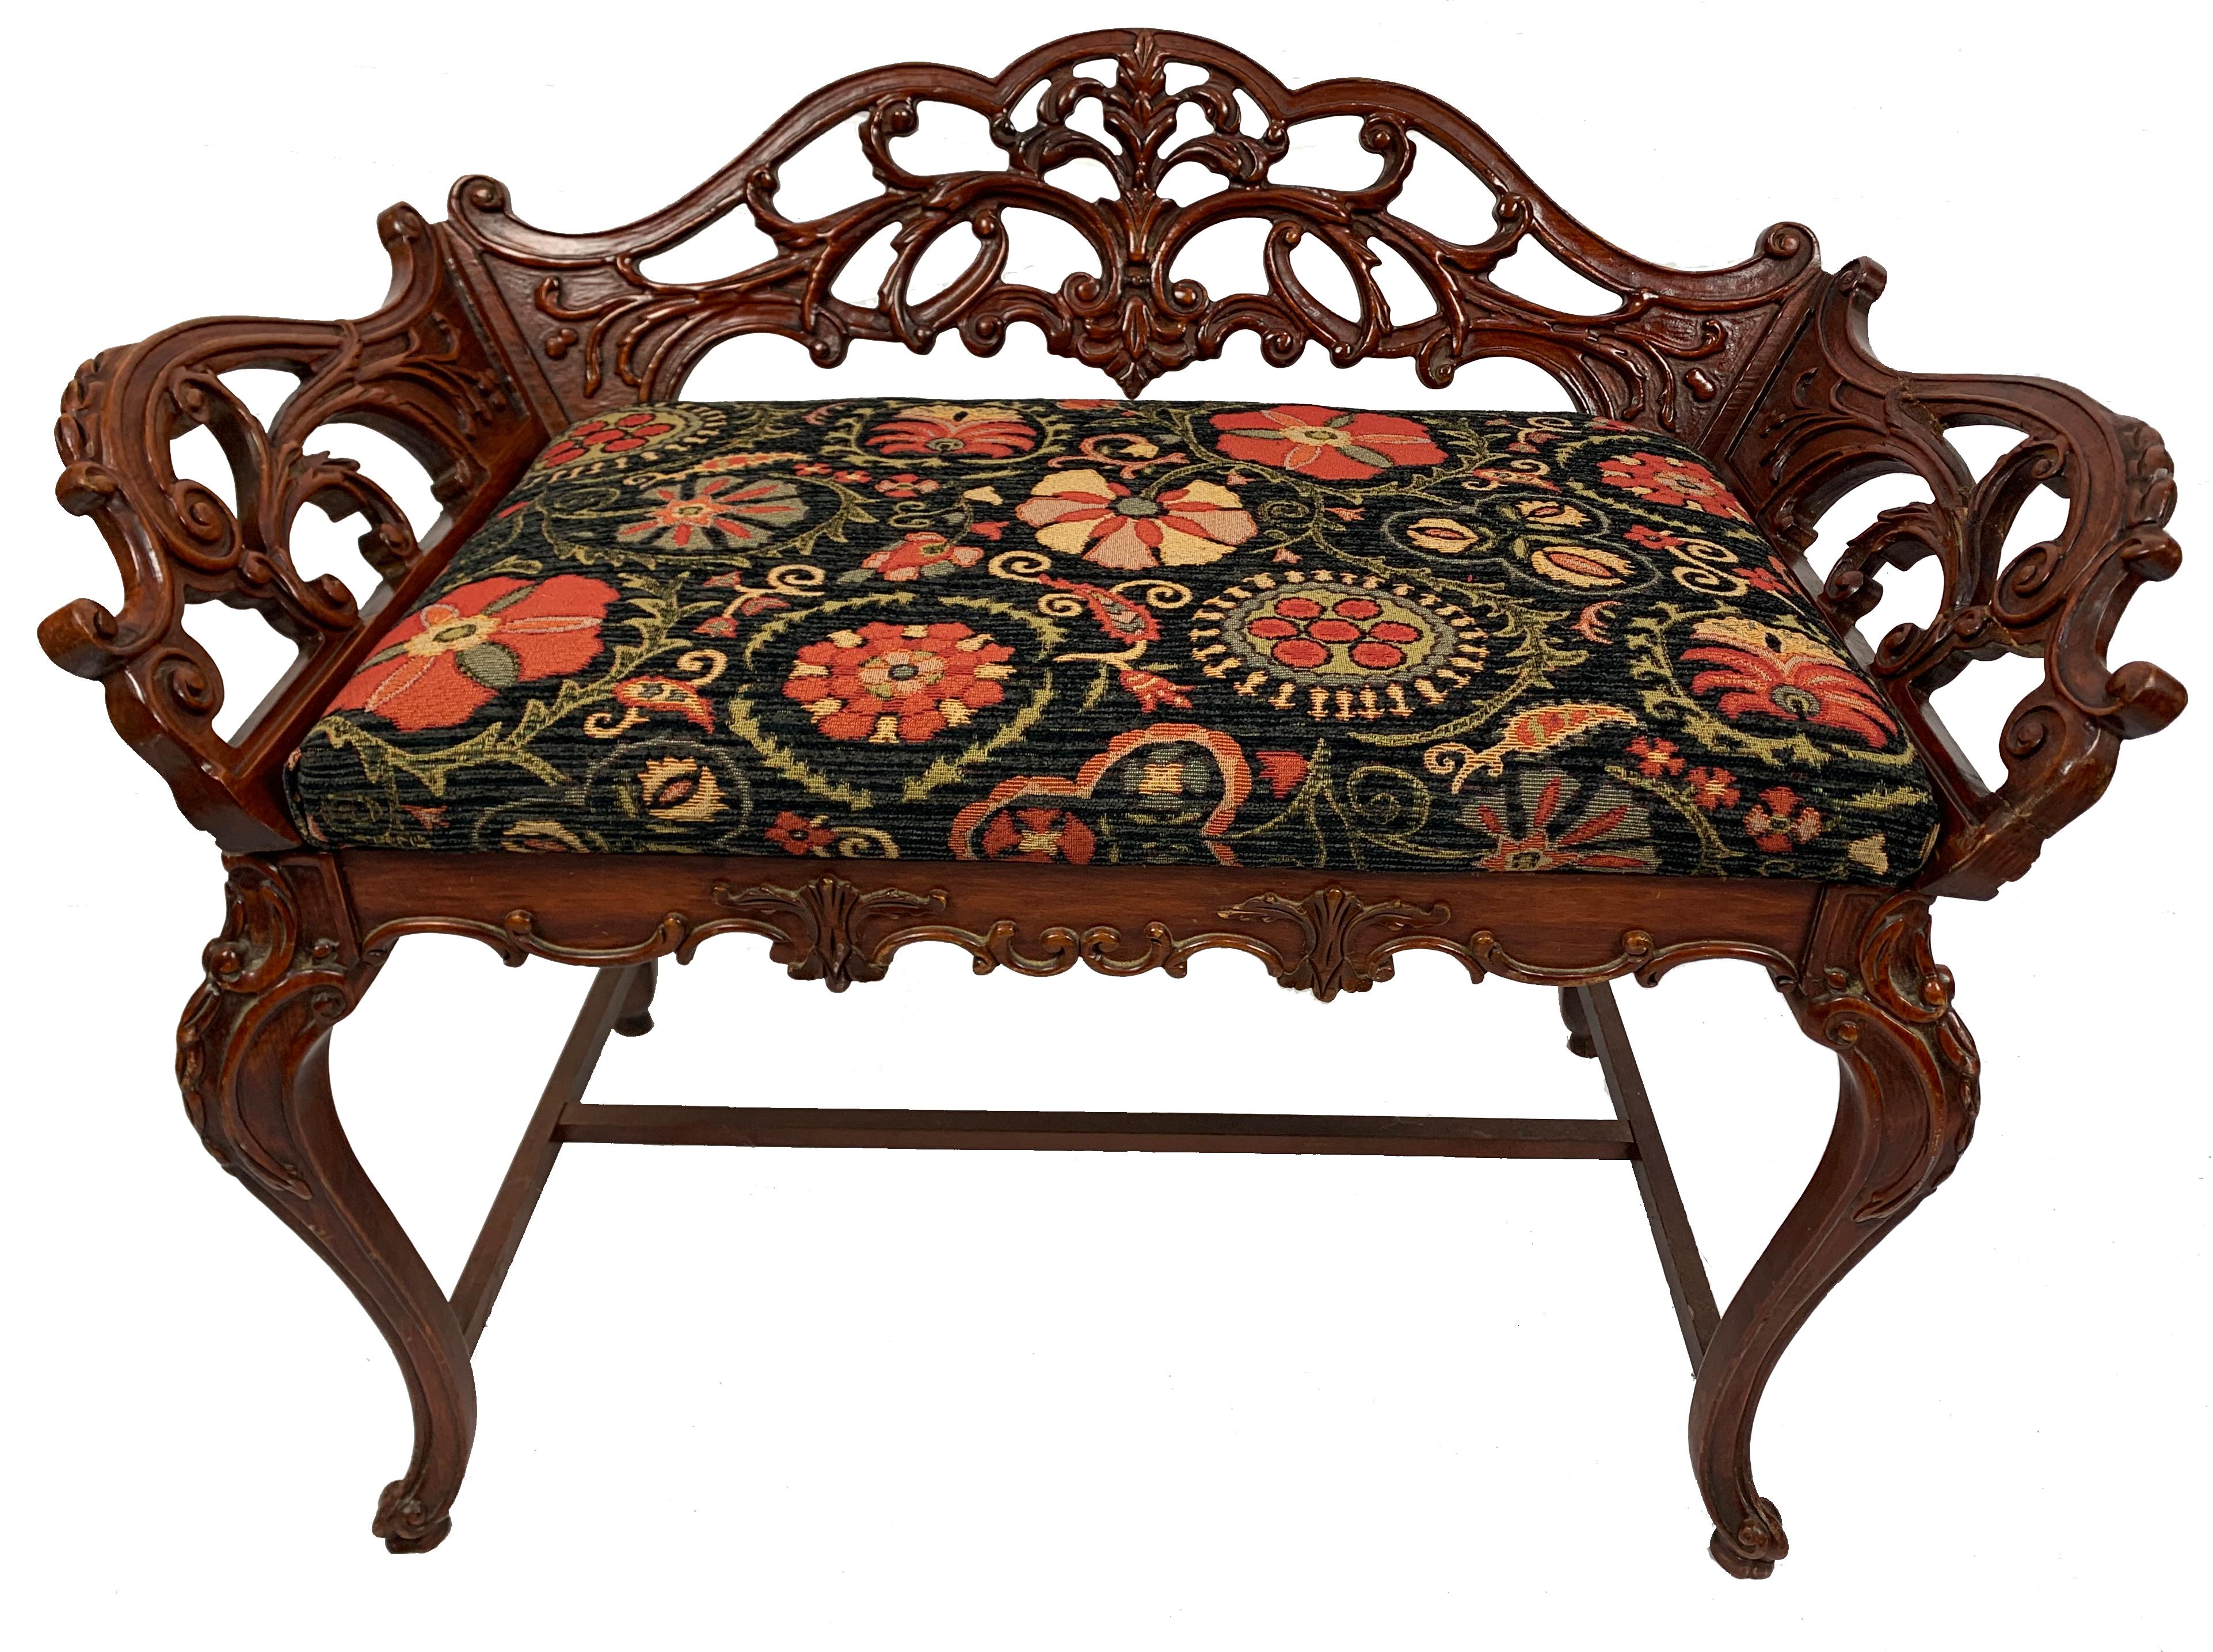 An exquisite, highly carved Italian wooden bench or vanity seat from the 19th century with upholstered seat.